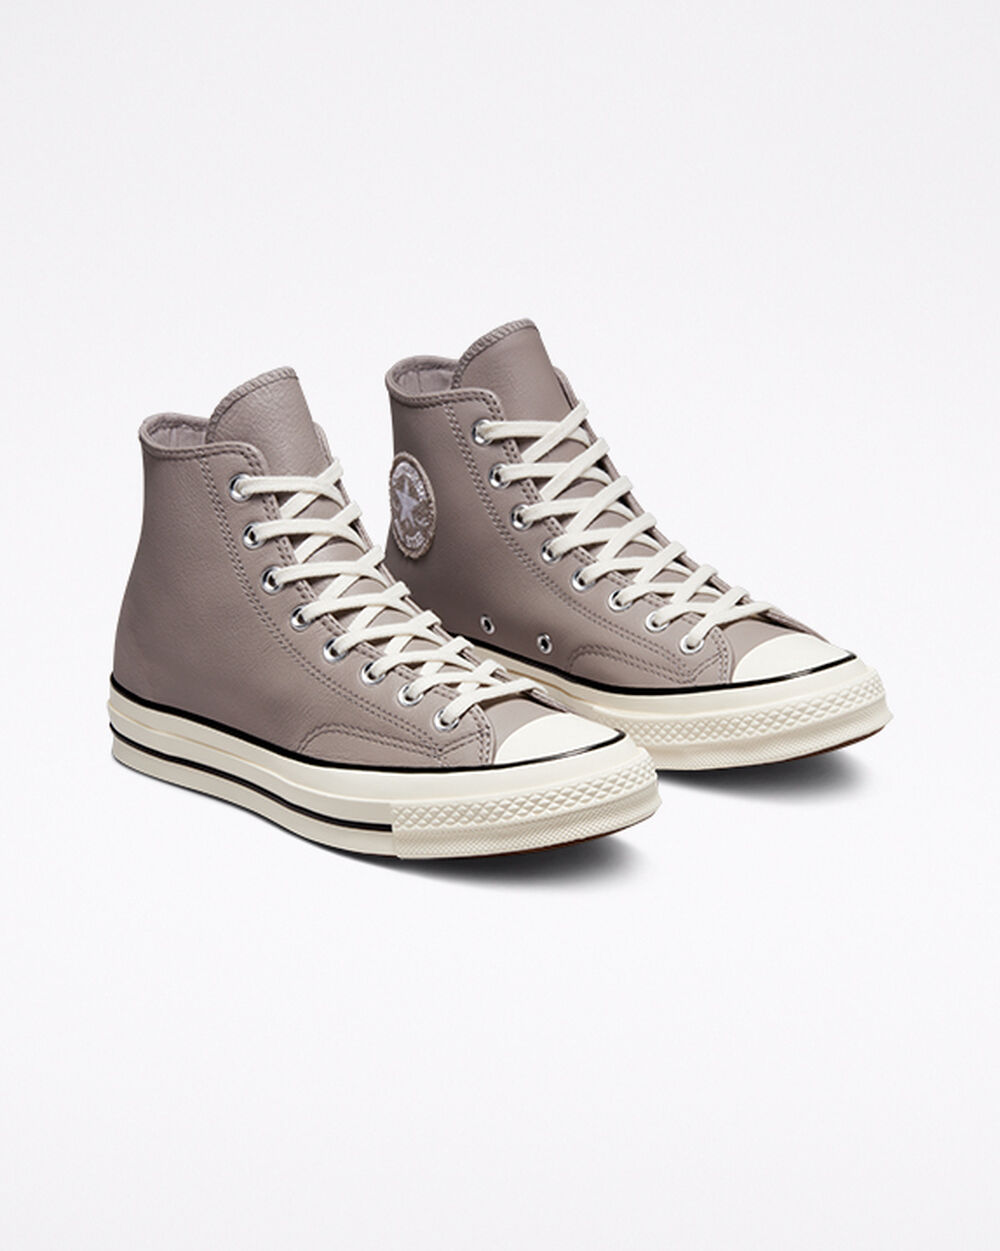 Tenis Converse Chuck 70 Mujer Grises Blancos Negros | Mexico-126306